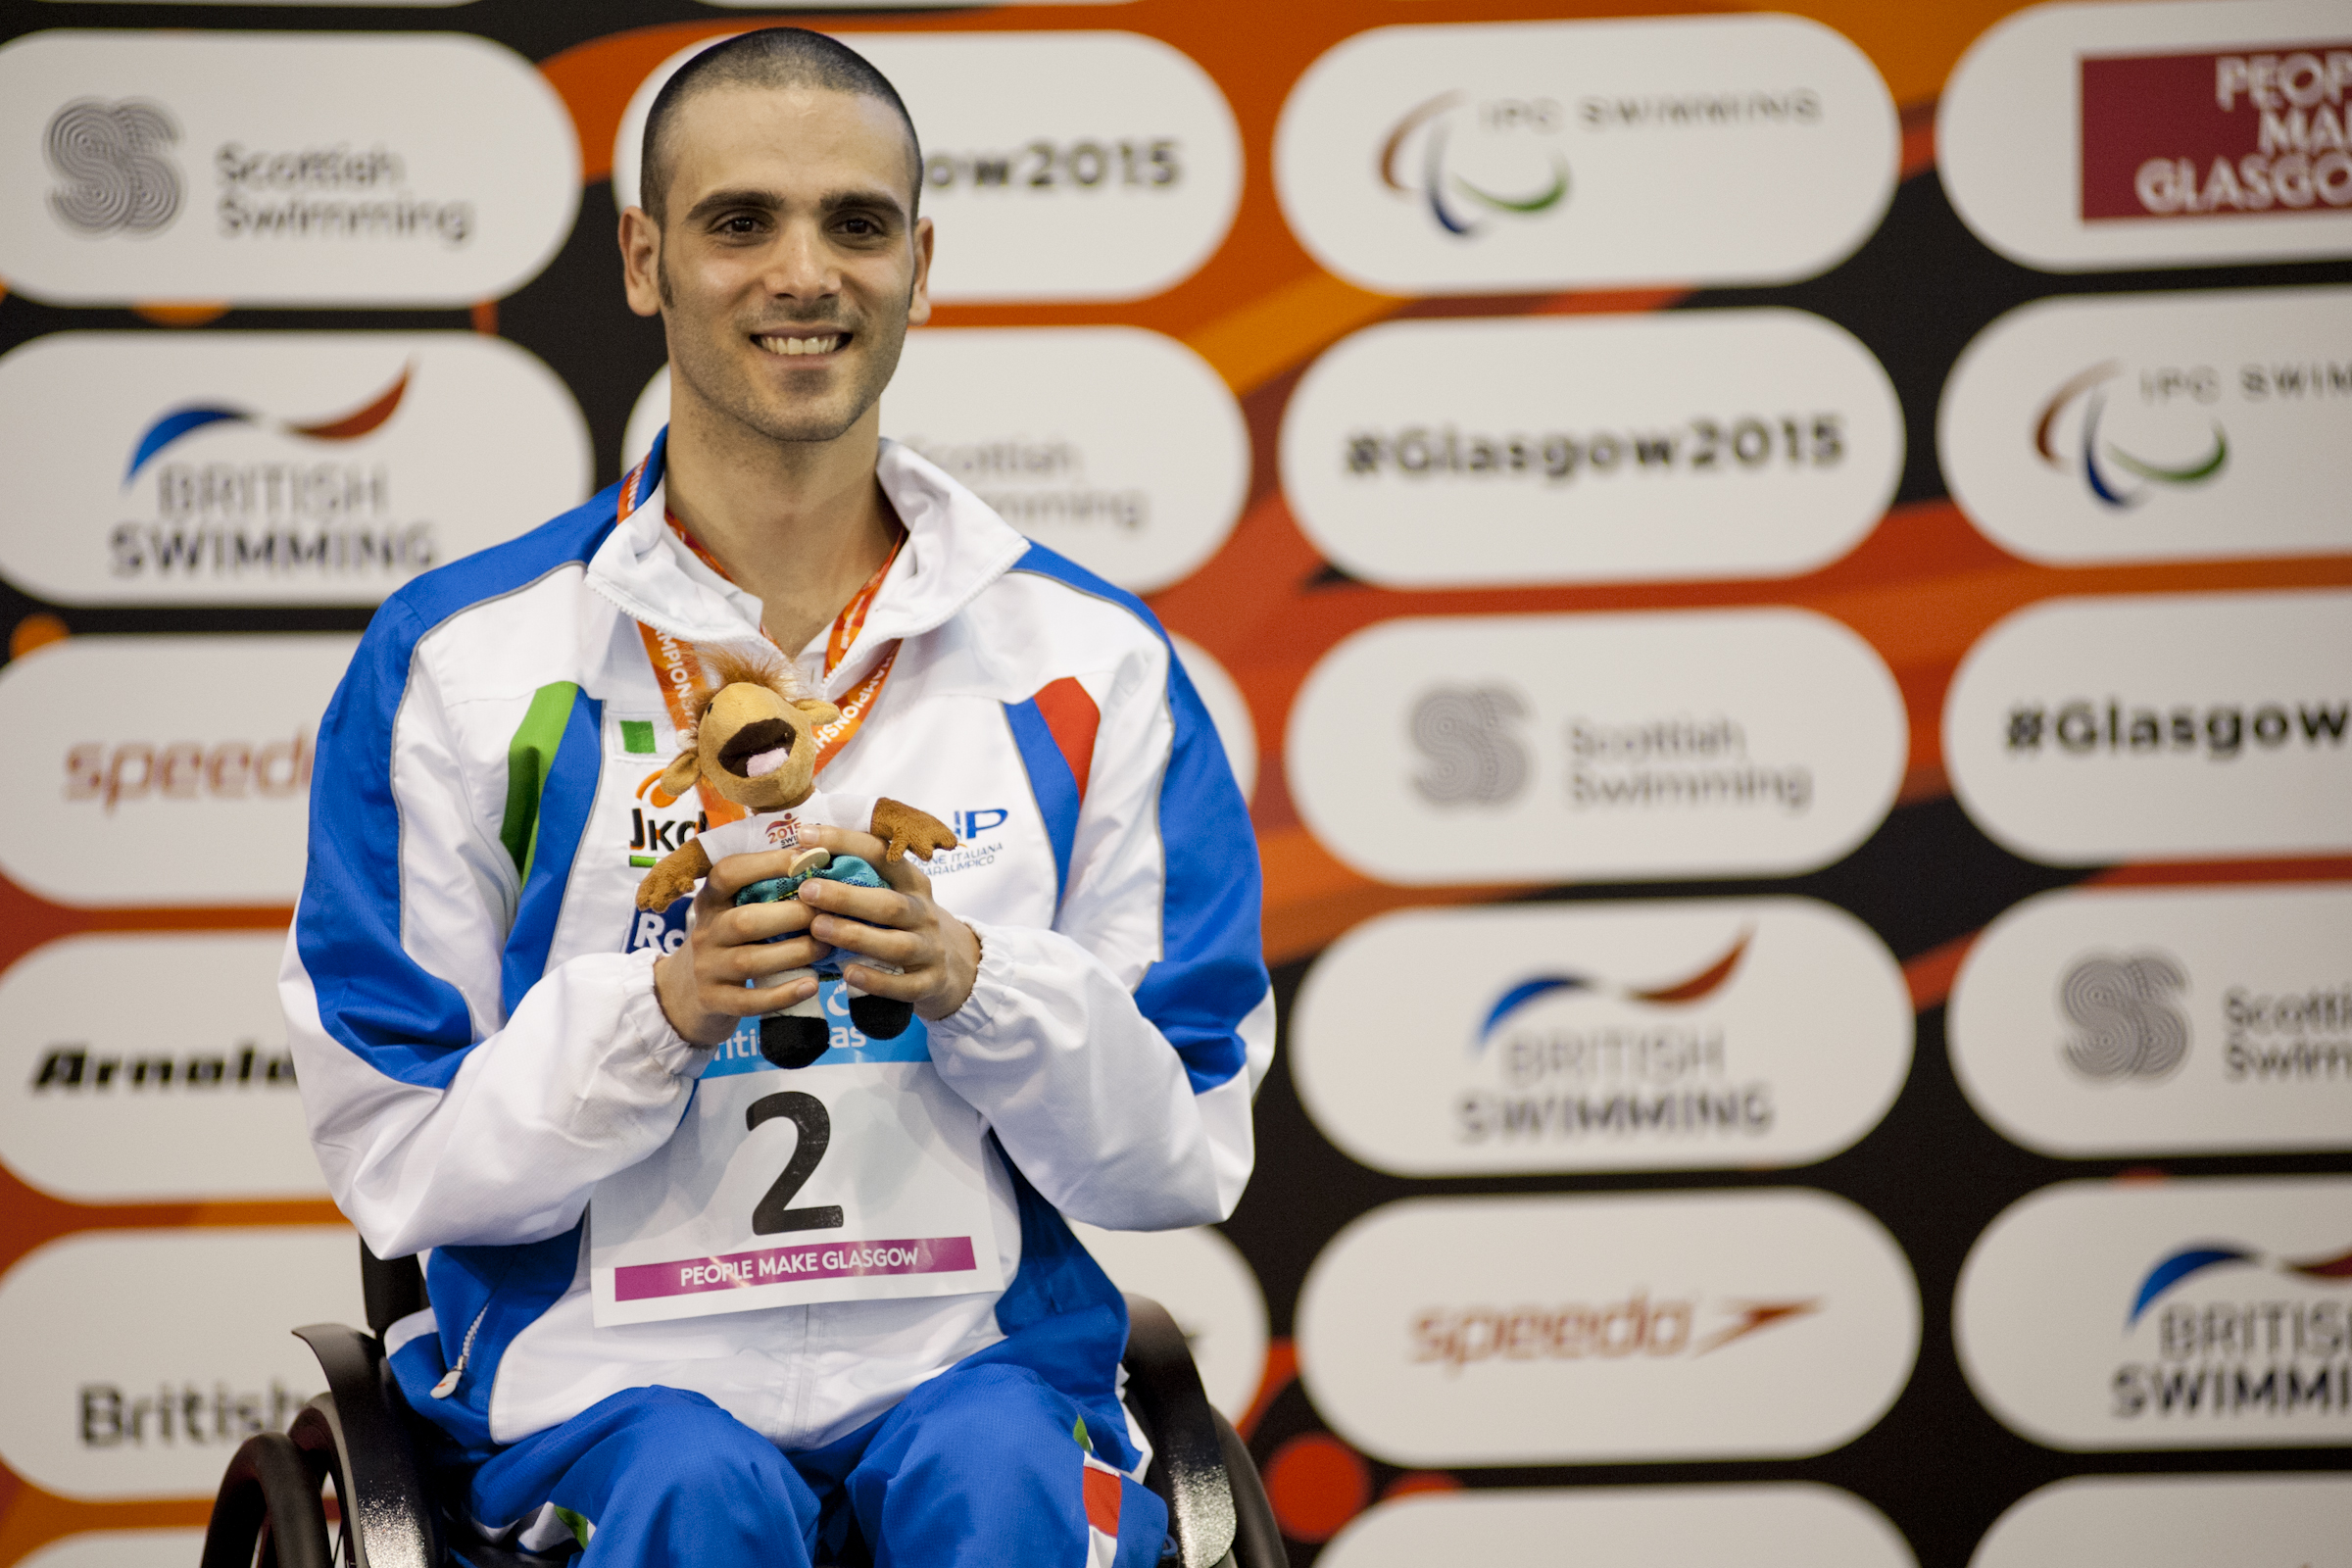 Vincenzo Boni of Italy on the podium after the Men's 50m Backstroke S3 at the 2015 IPC Swimming World Championships in Glasgow.